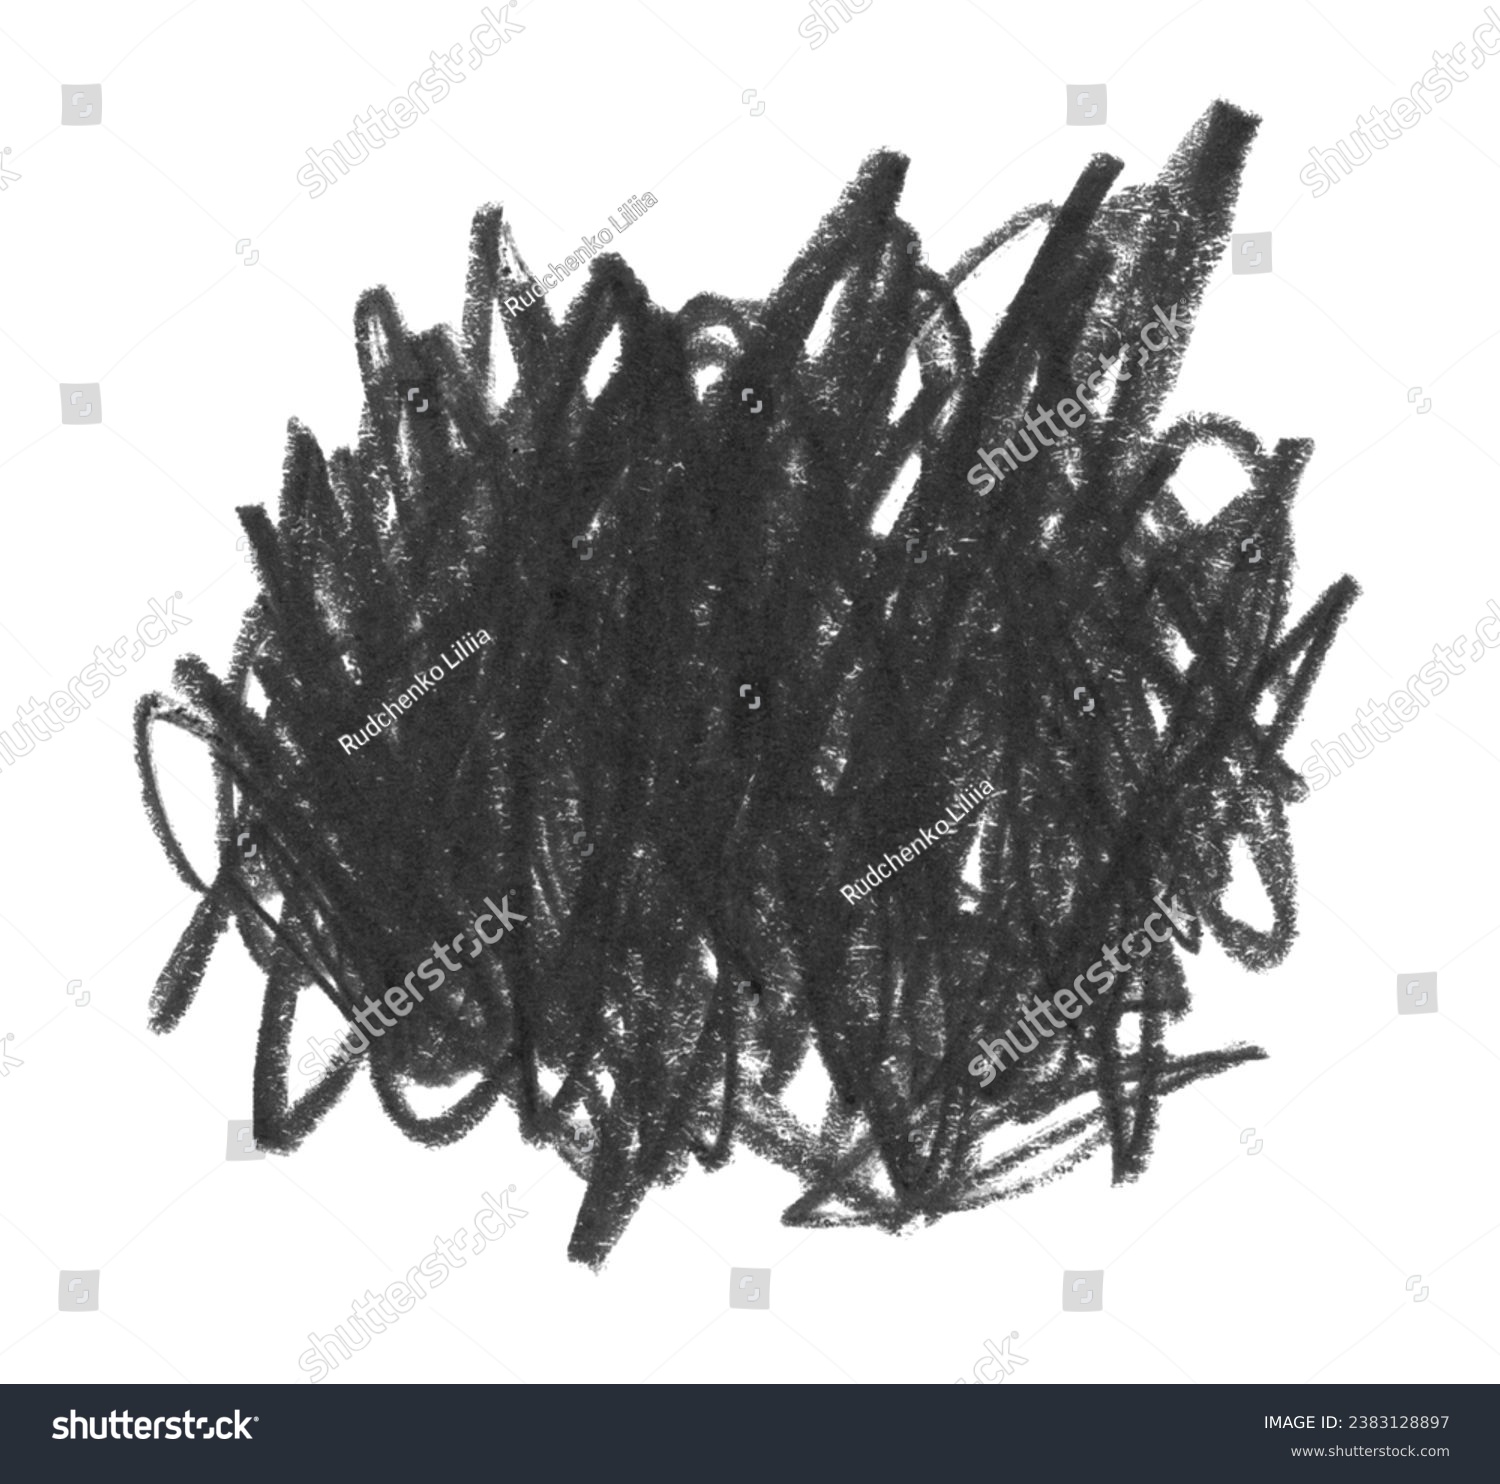 Hand drawn scrawl sketch black line hatching. Pen, pencil, pastel art grunge texture stain isolated on white background. #2383128897